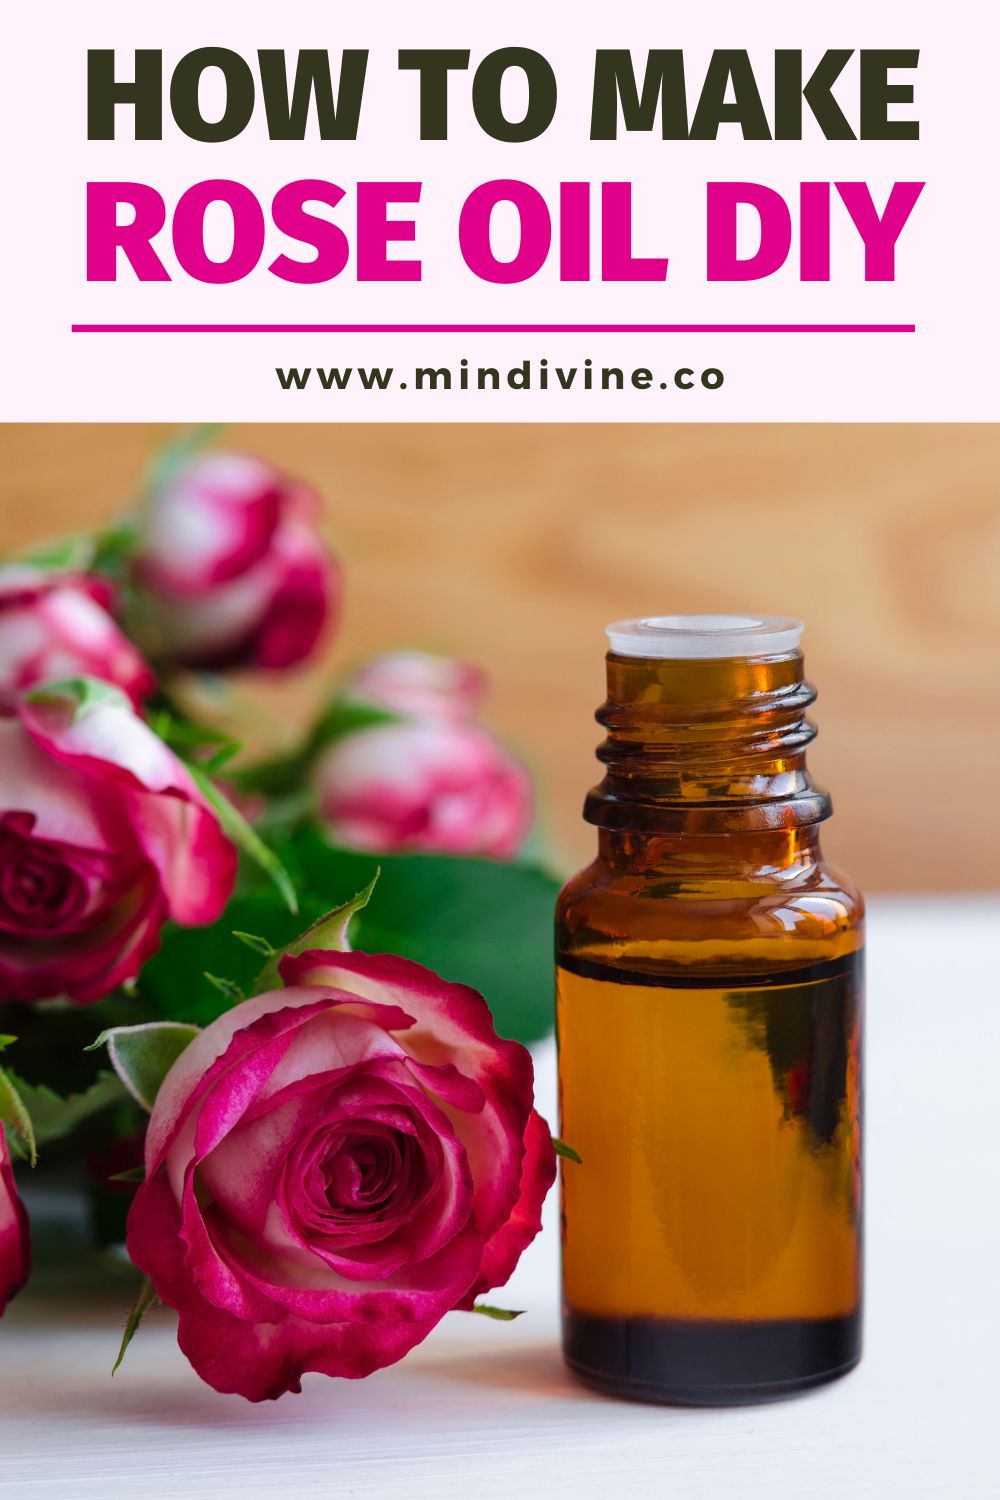 How to make rose oil.